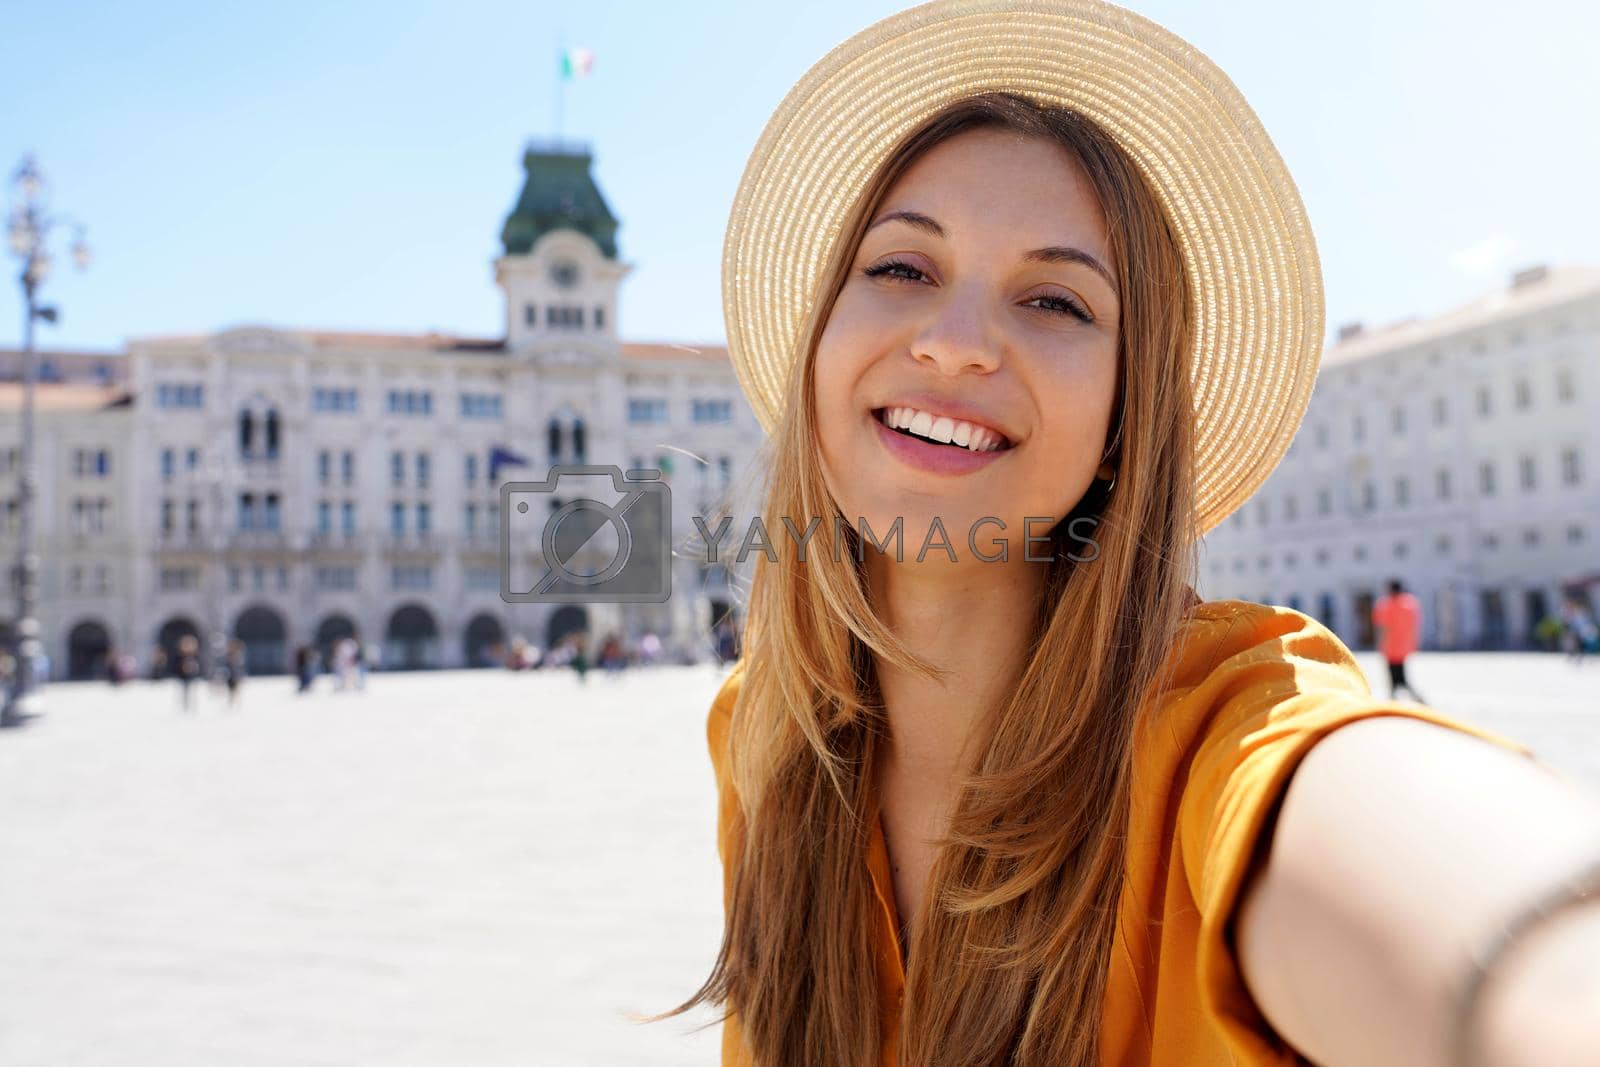 Royalty free image of Cultural tourism in Italy. Self portrait of smiling traveler girl visiting Trieste, Italy. by sergio_monti